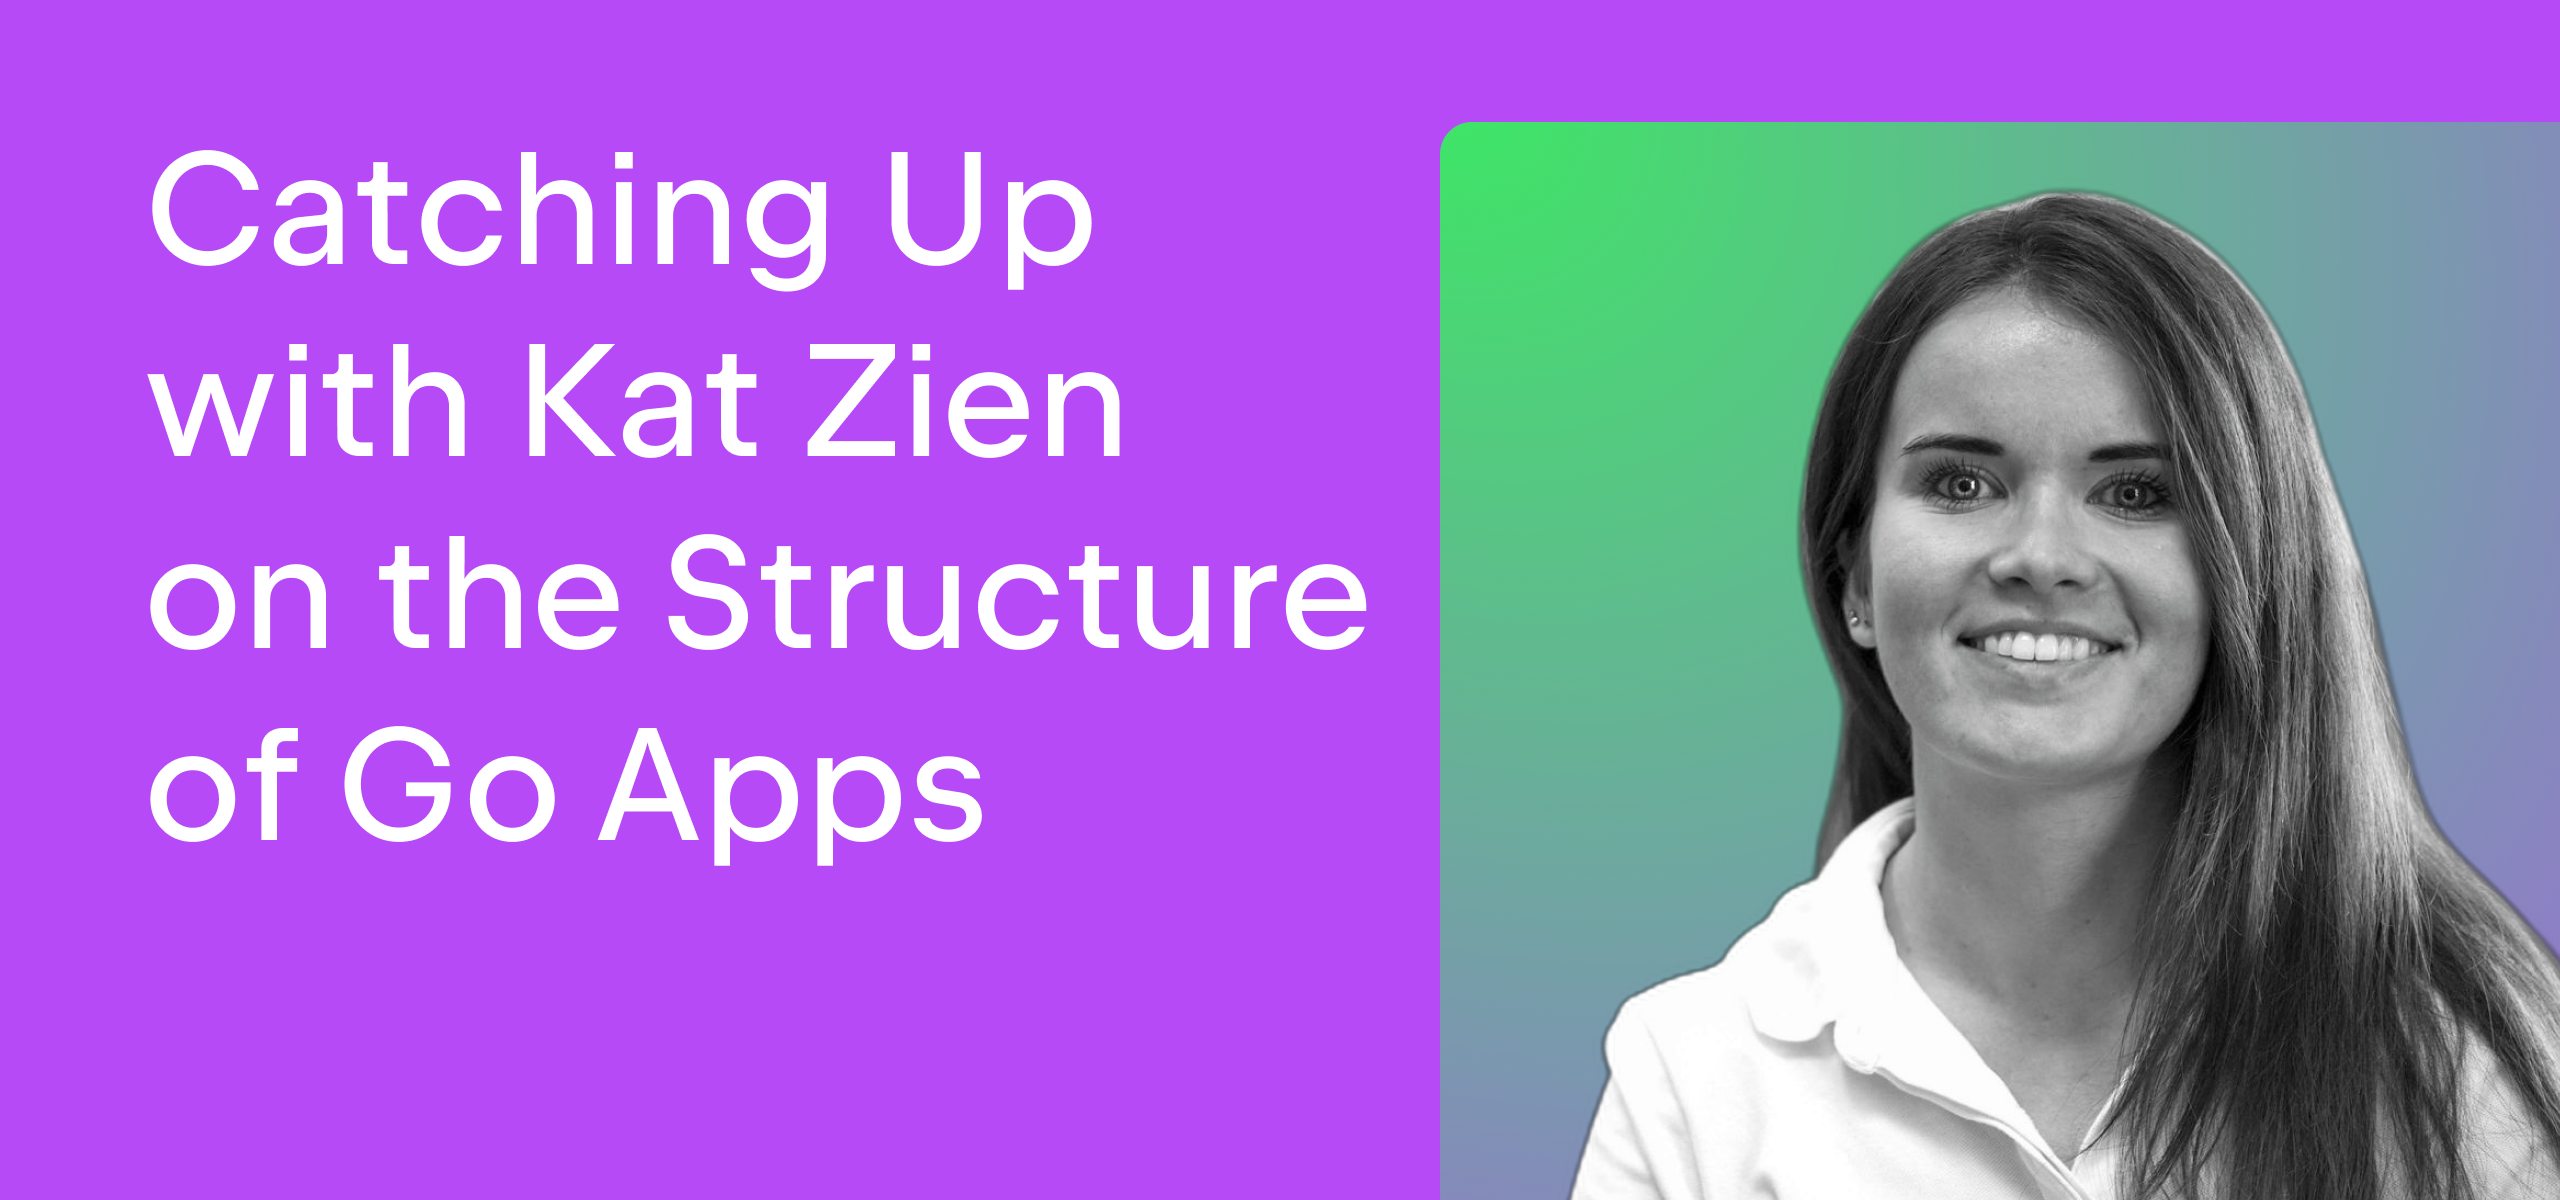 Catching Up With Kat Zien on the Structure of Go Apps